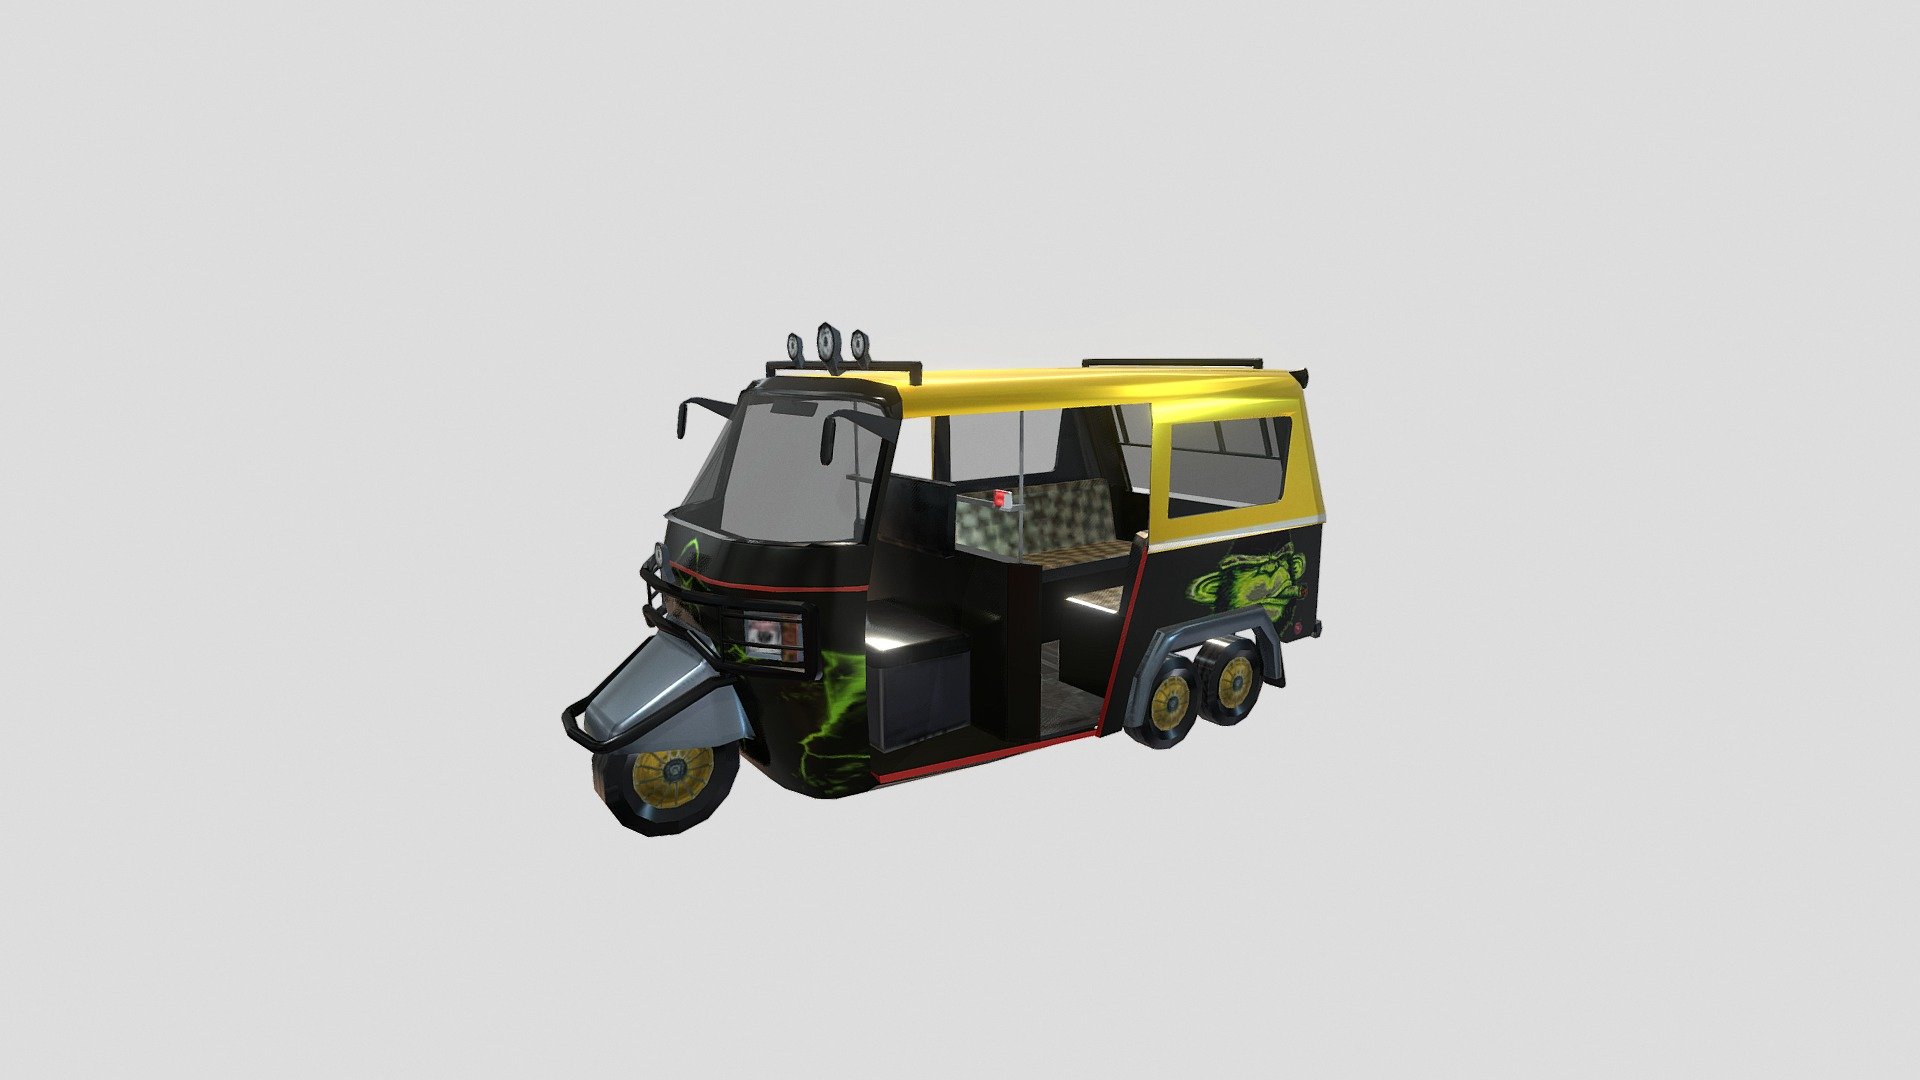 Working on a series of models from my time exploring South East Asia, starting with a Tuk Tuk fromIndia . Modeled in Blender and textured in Substance Painter 3d model